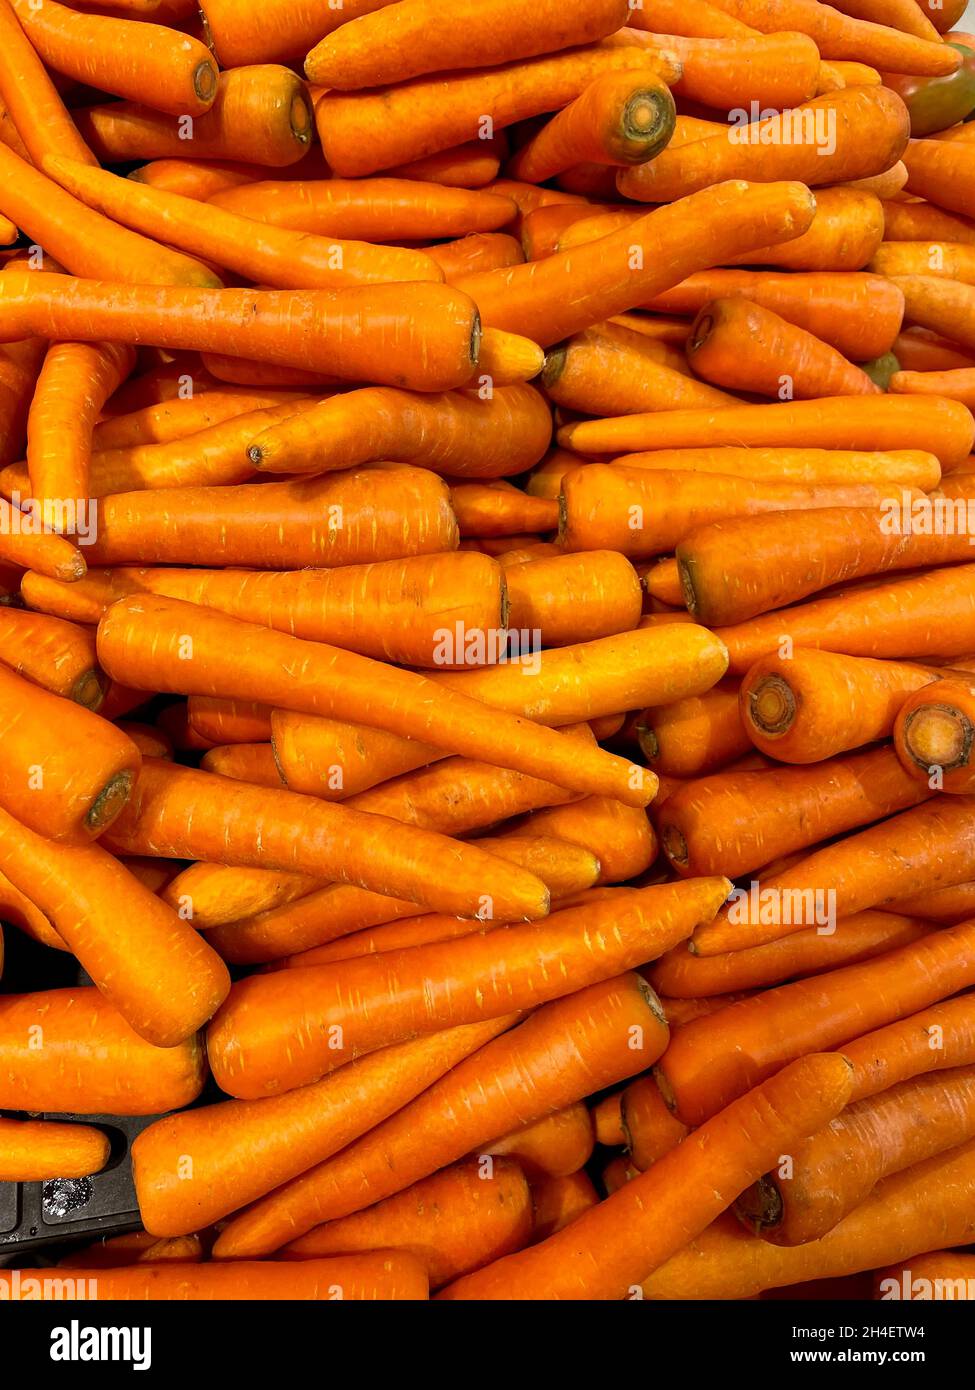 Carrots are biennial plants (12 - 24 months life cycle) which store large amounts of carbohydrates for the plant to flower in the second year. Stock Photo